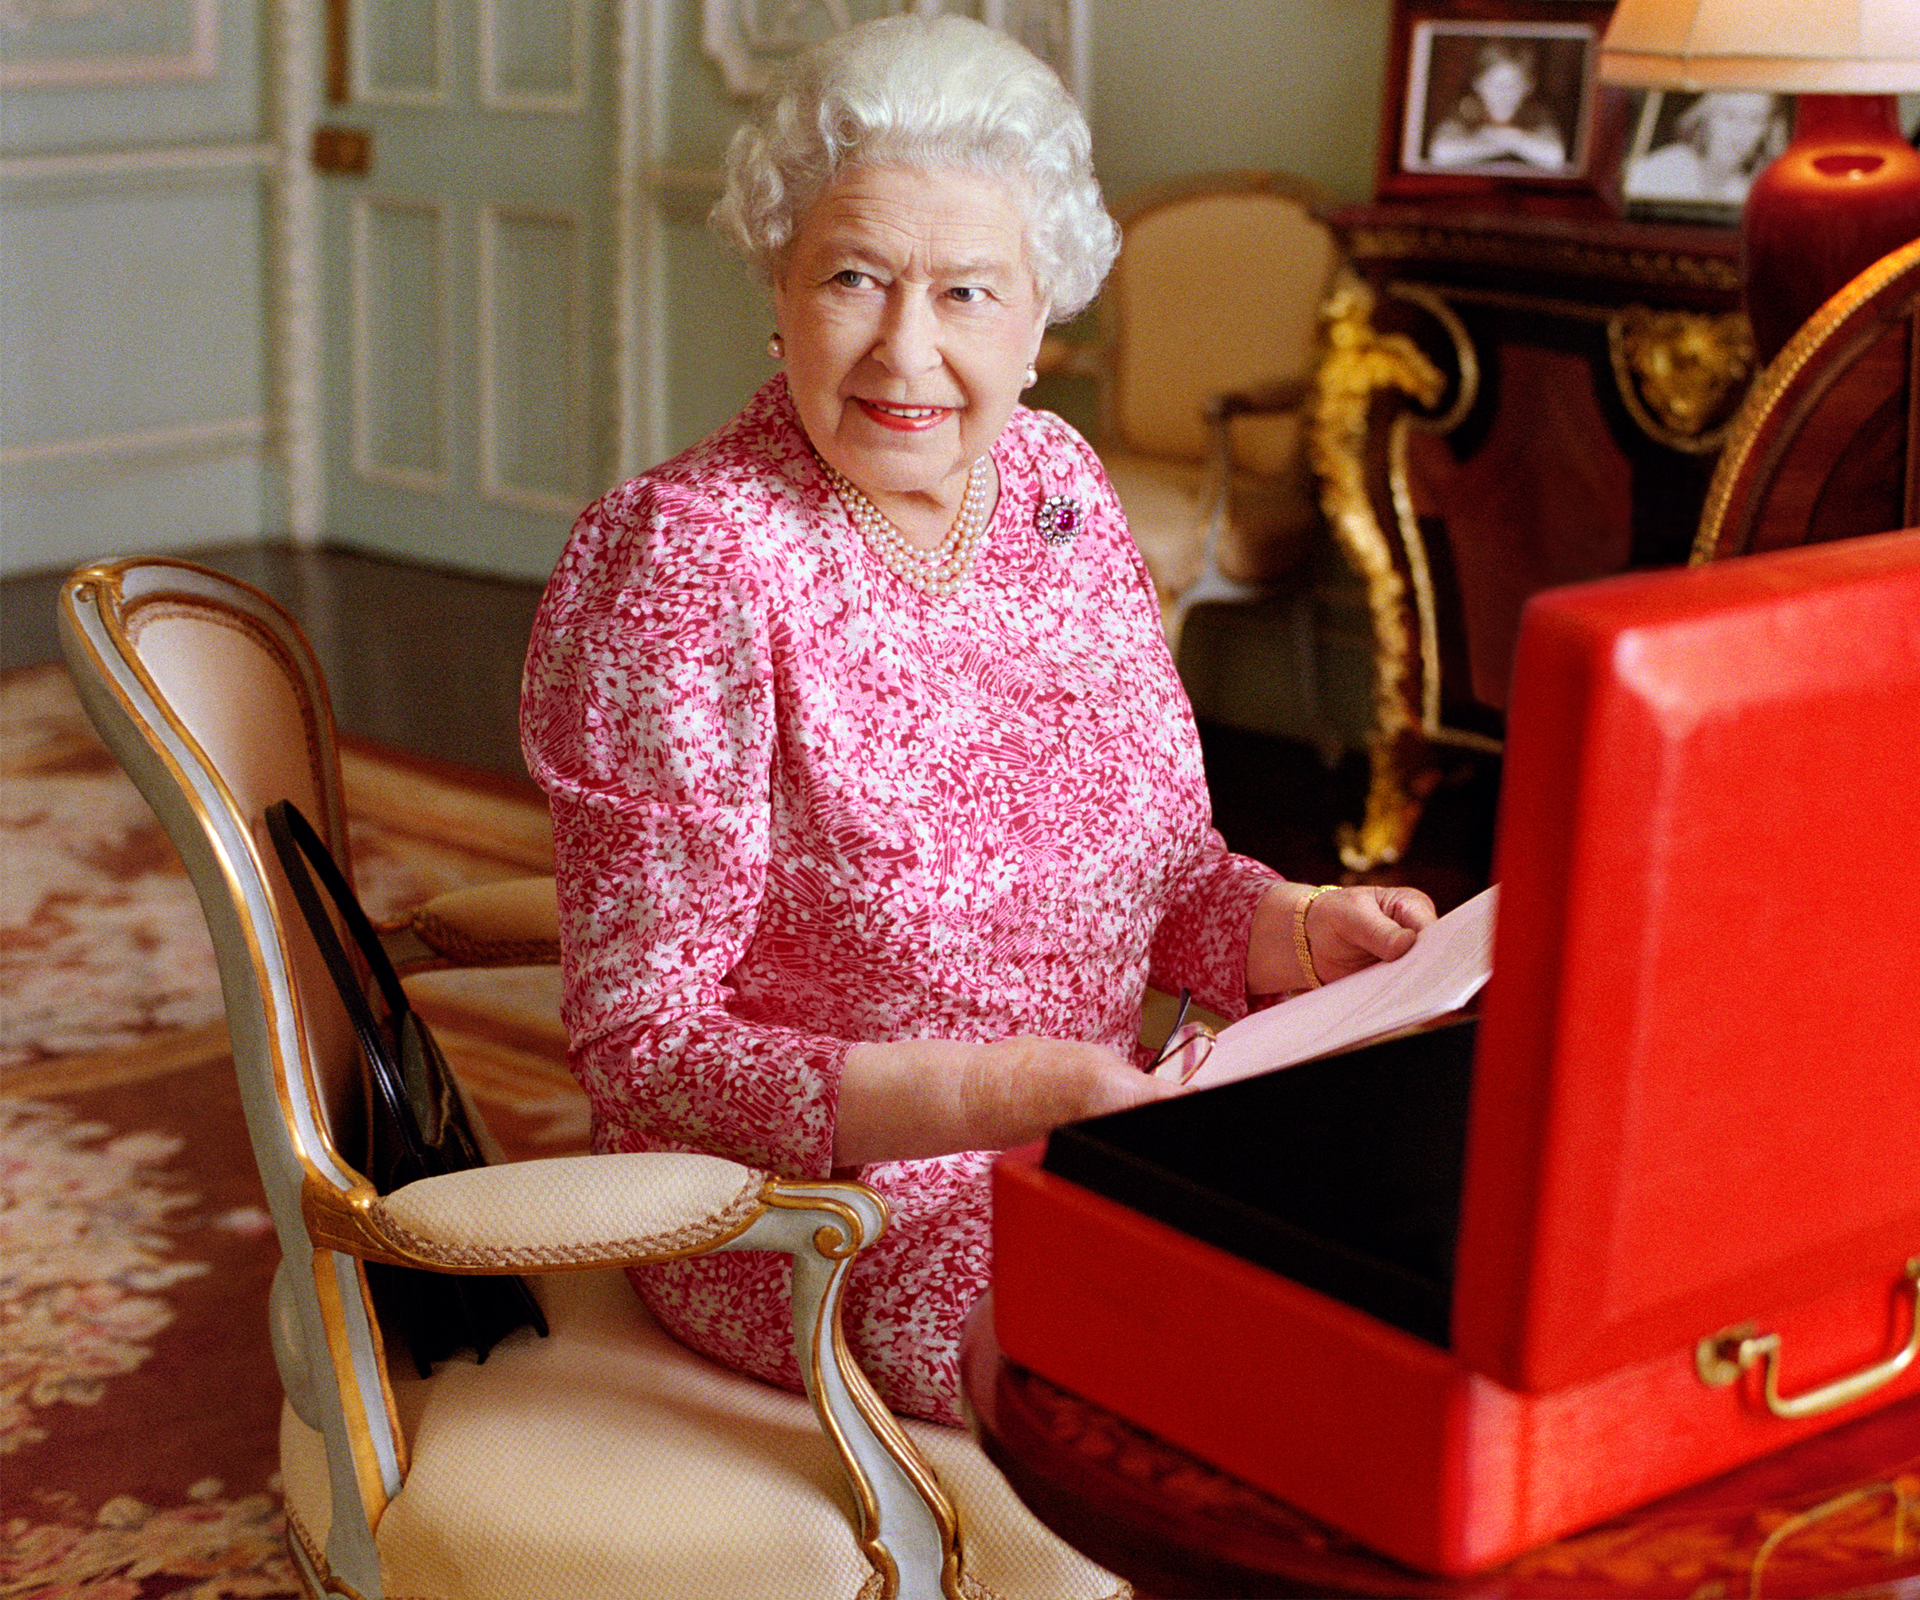 The Queen gives thanks for ‘messages of great kindness’